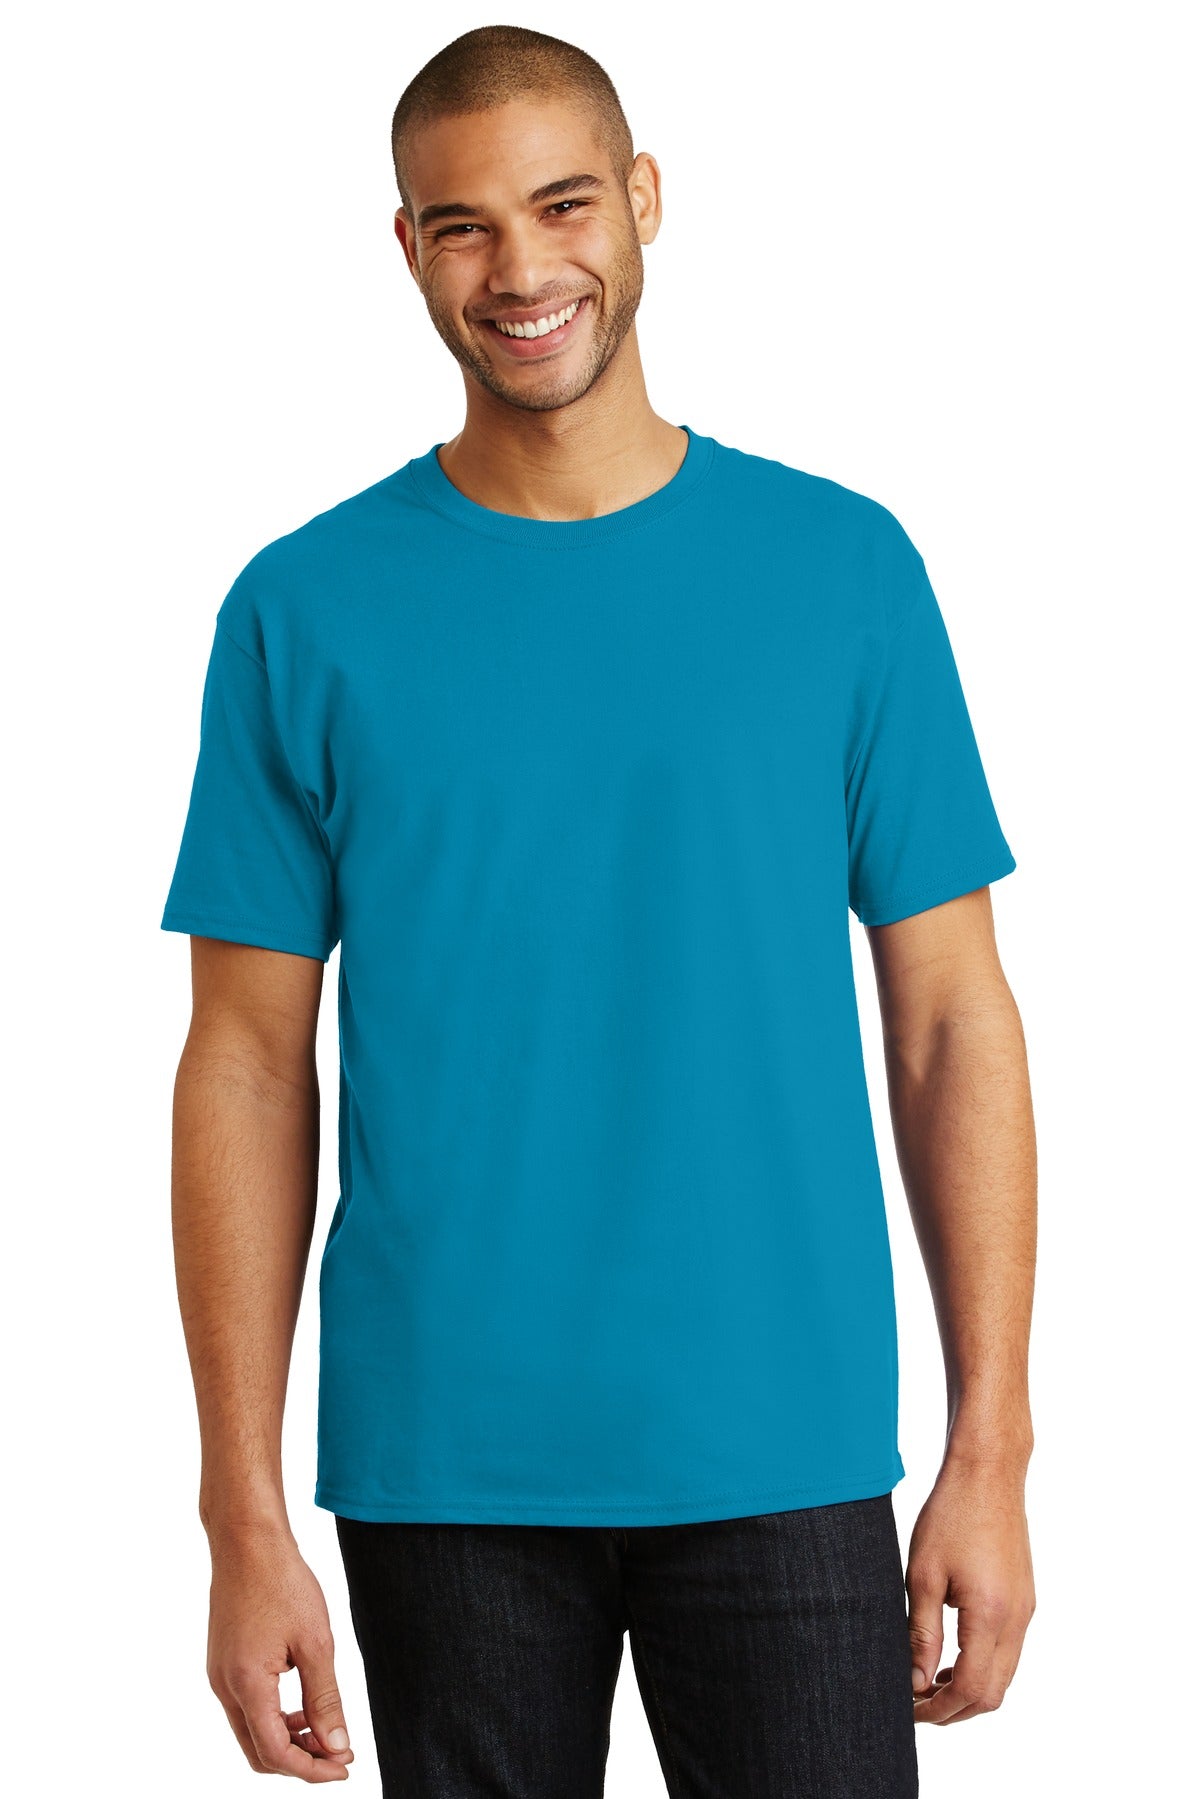 5250-Teal-S